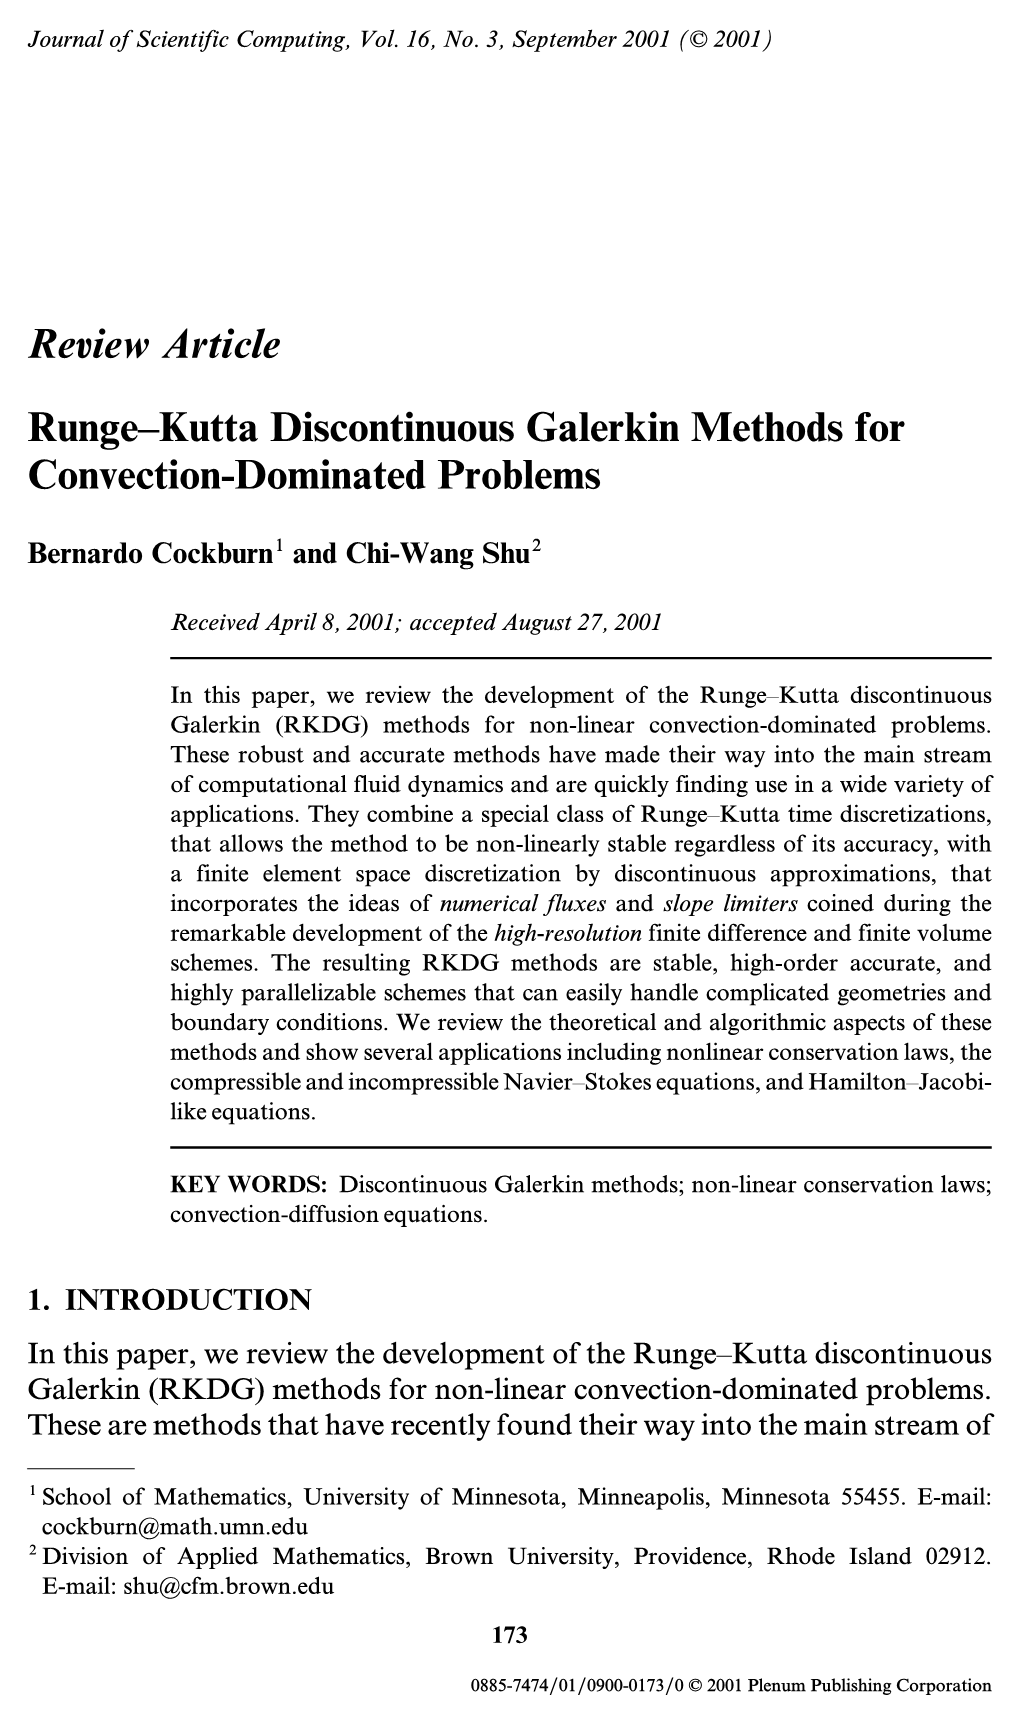 Runge–Kutta Discontinuous Galerkin Methods for Convection-Dominated Problems